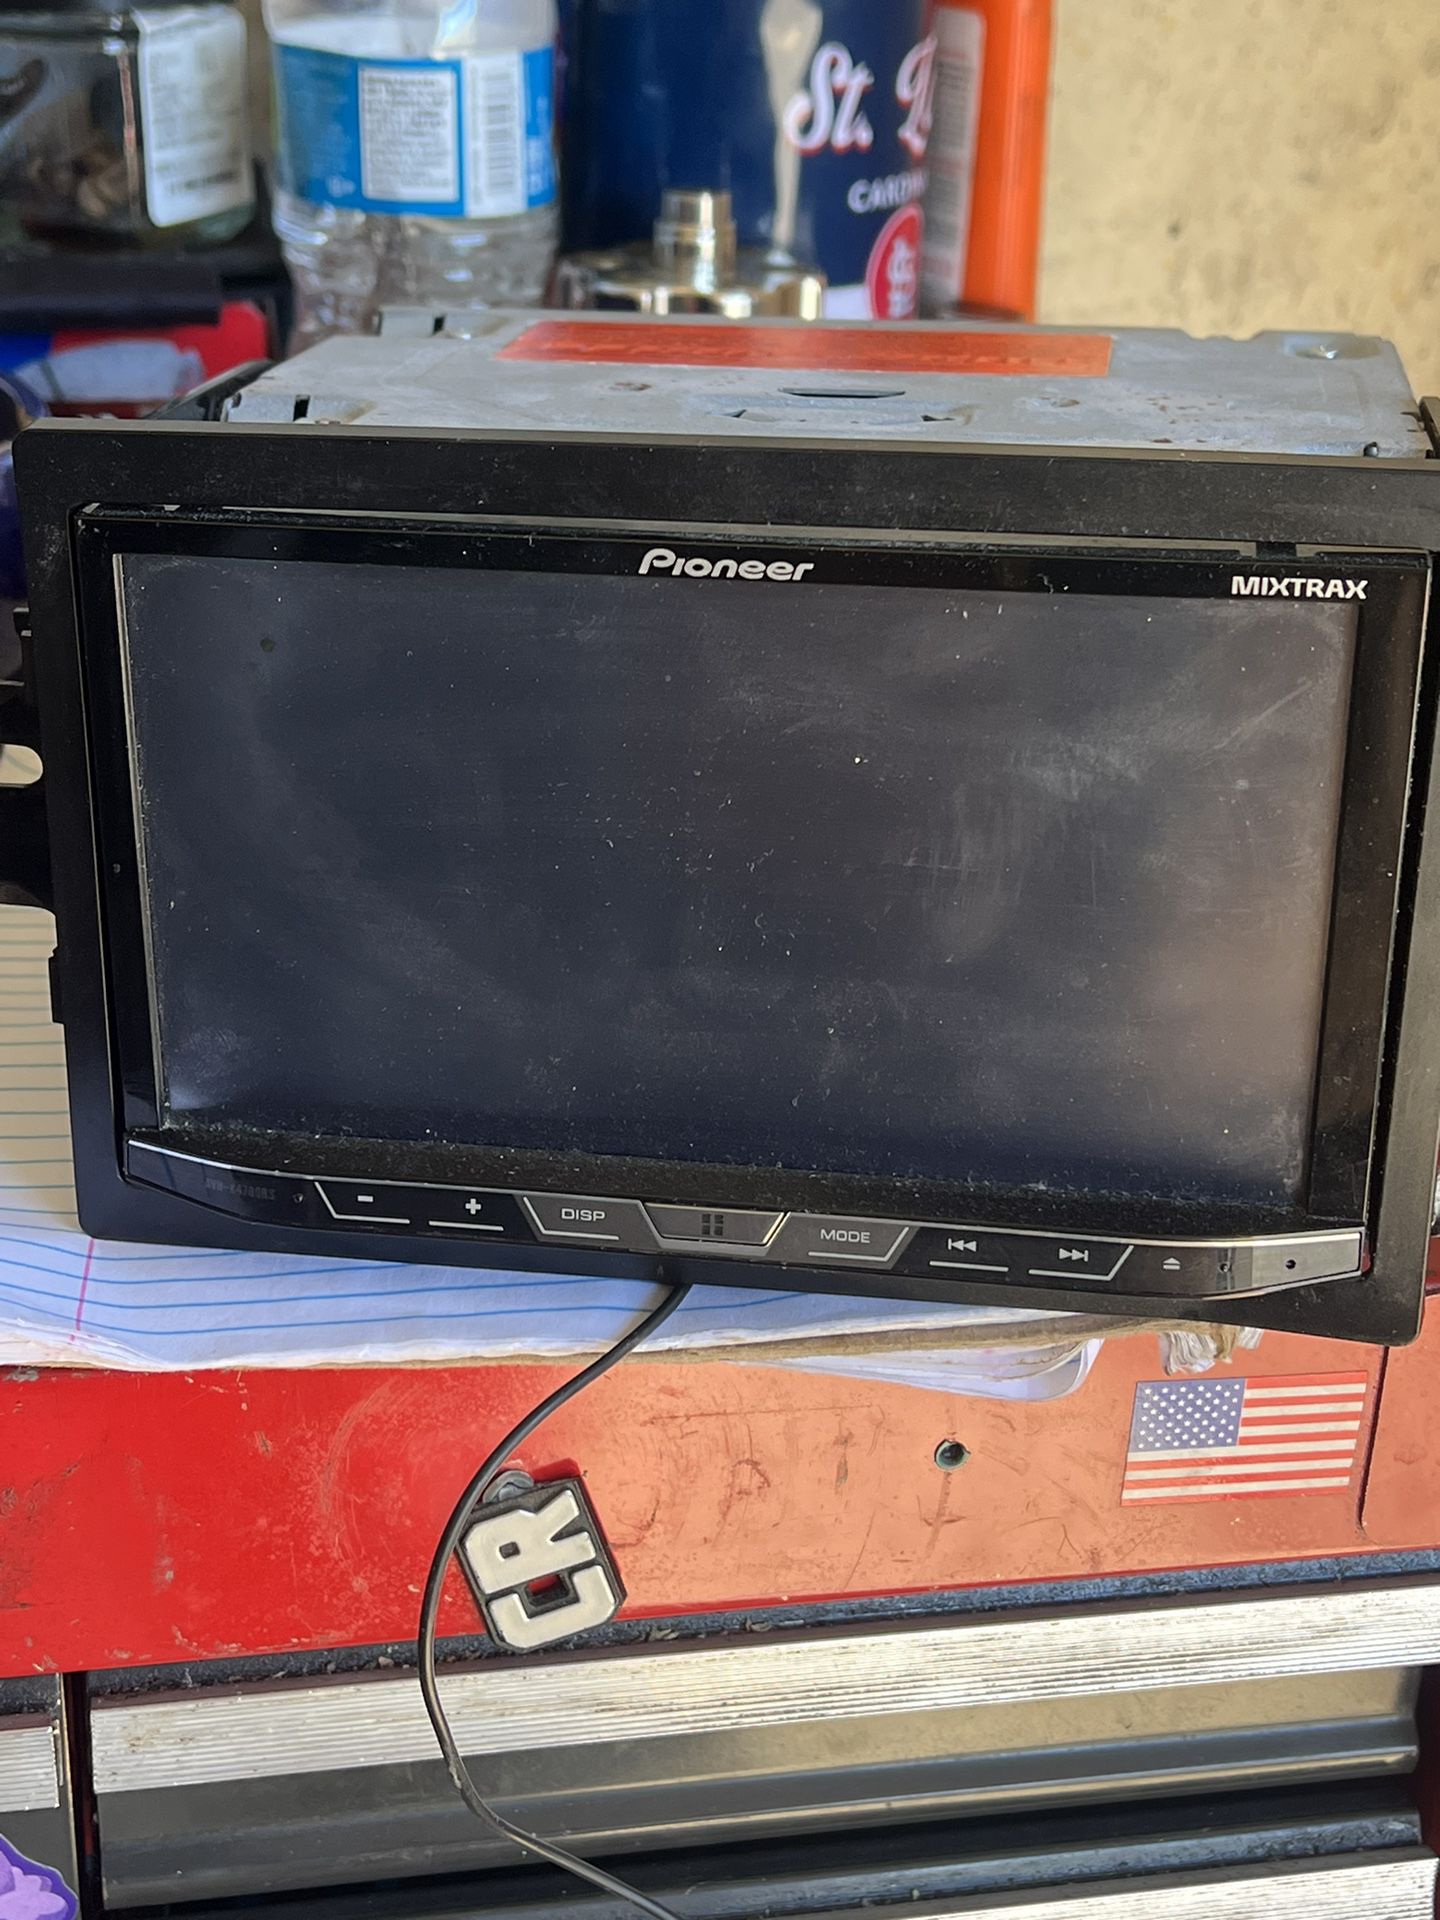 Pioneer Radio Came Out Impala Works Fine 140$ OBO